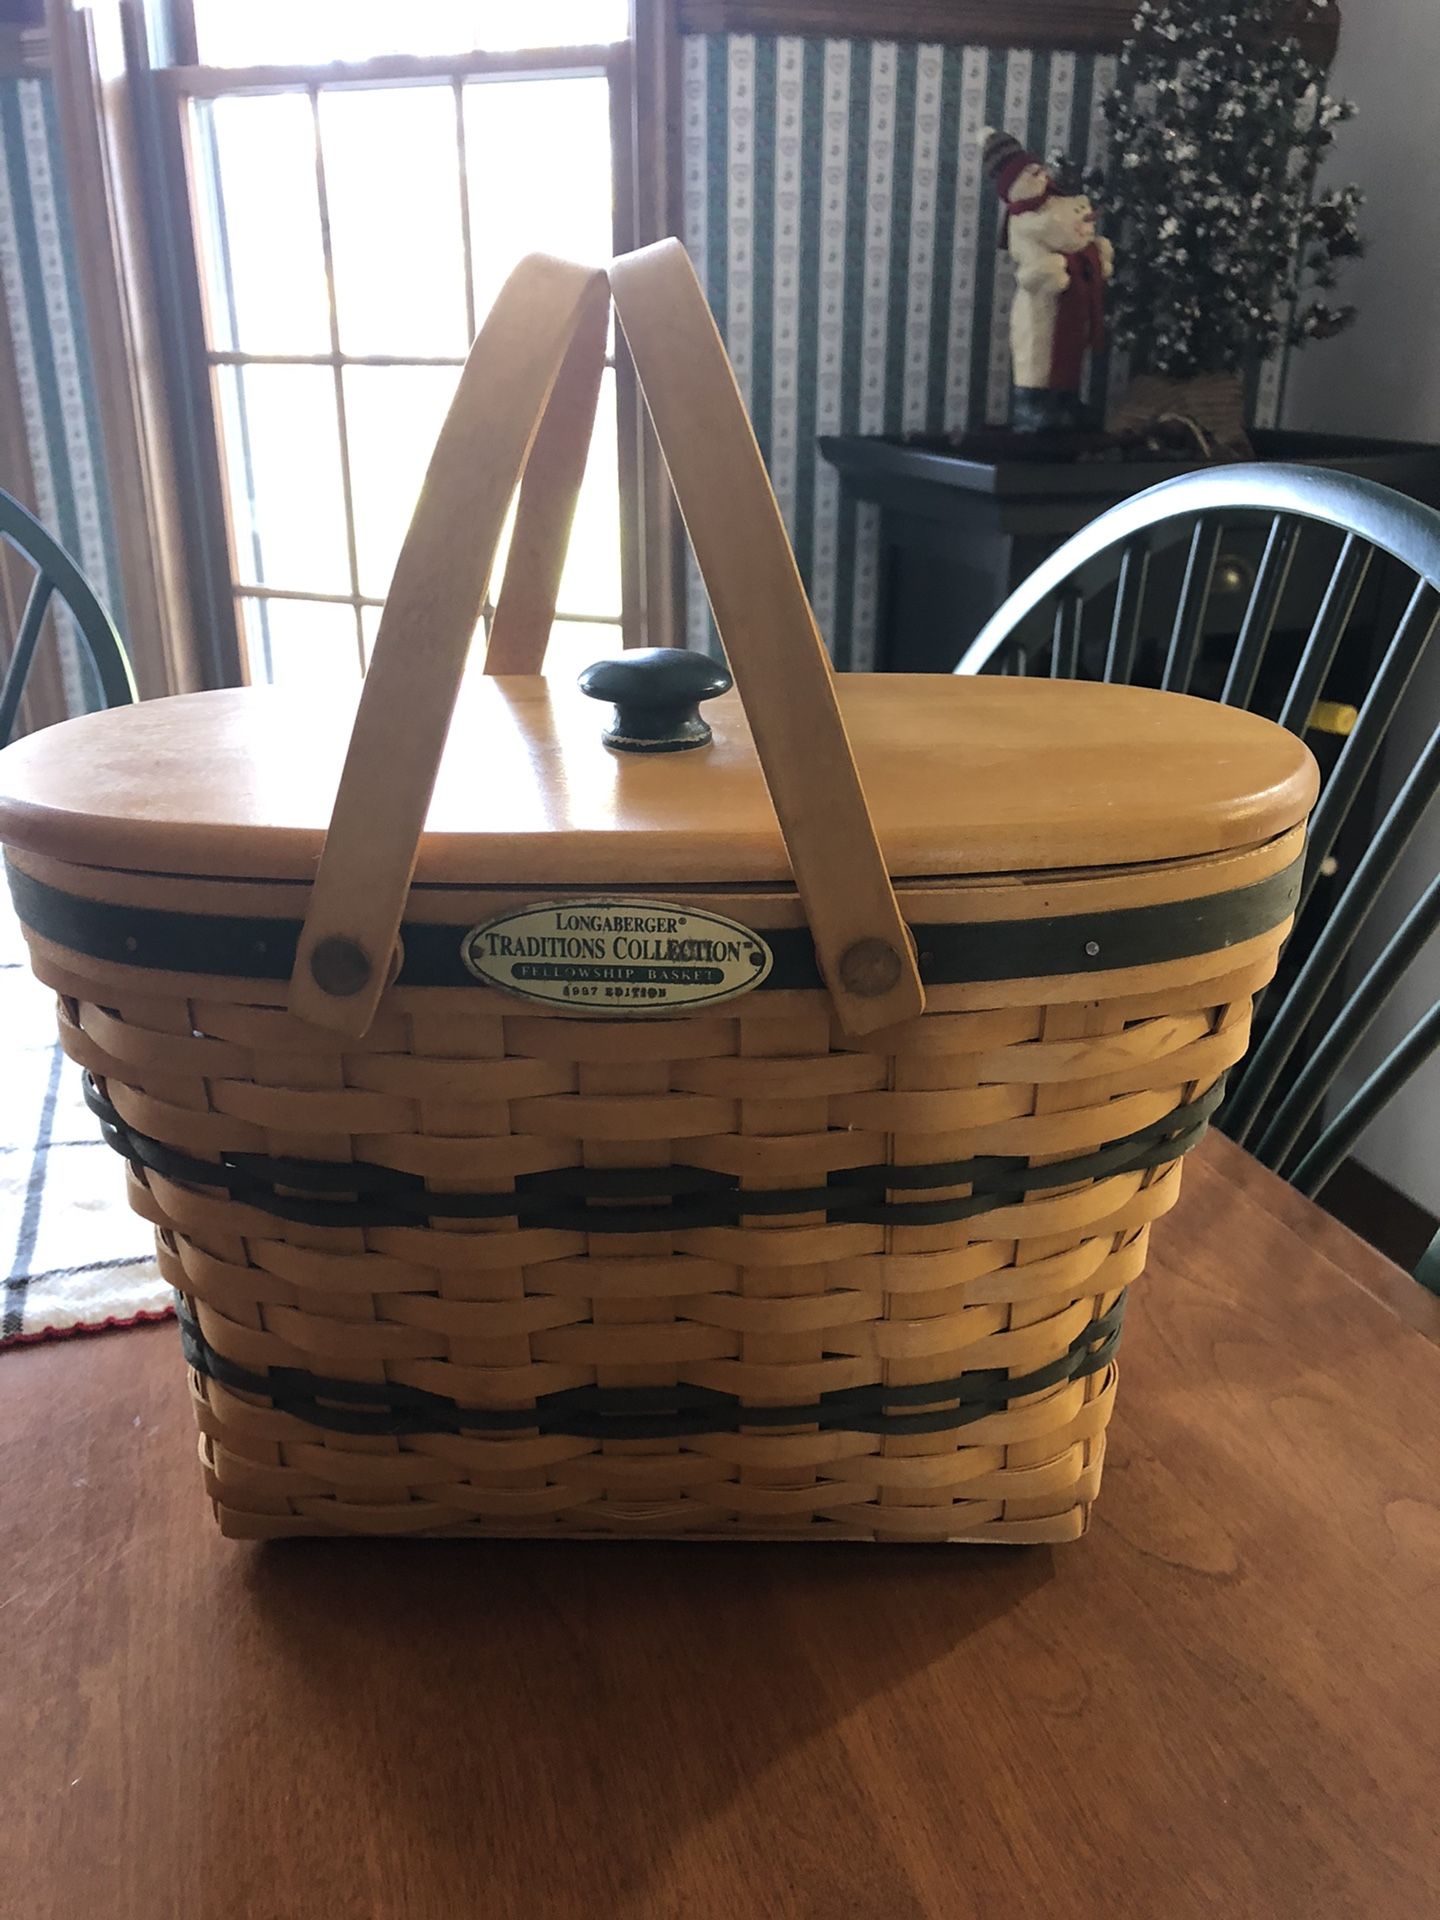 1997 Longaberger Traditions Collection Basket